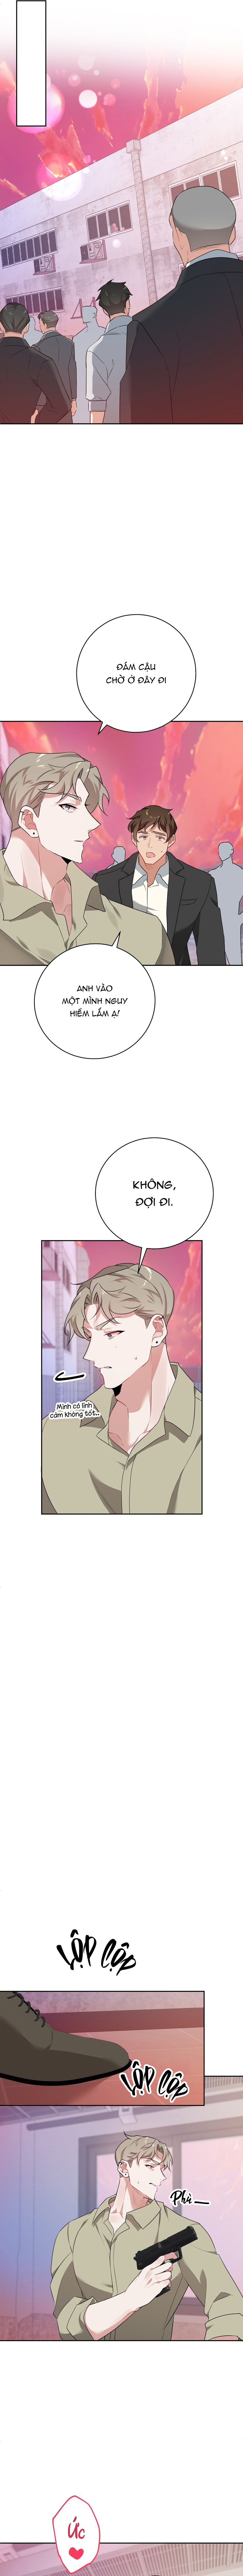 immoral-relationship-chap-8-8